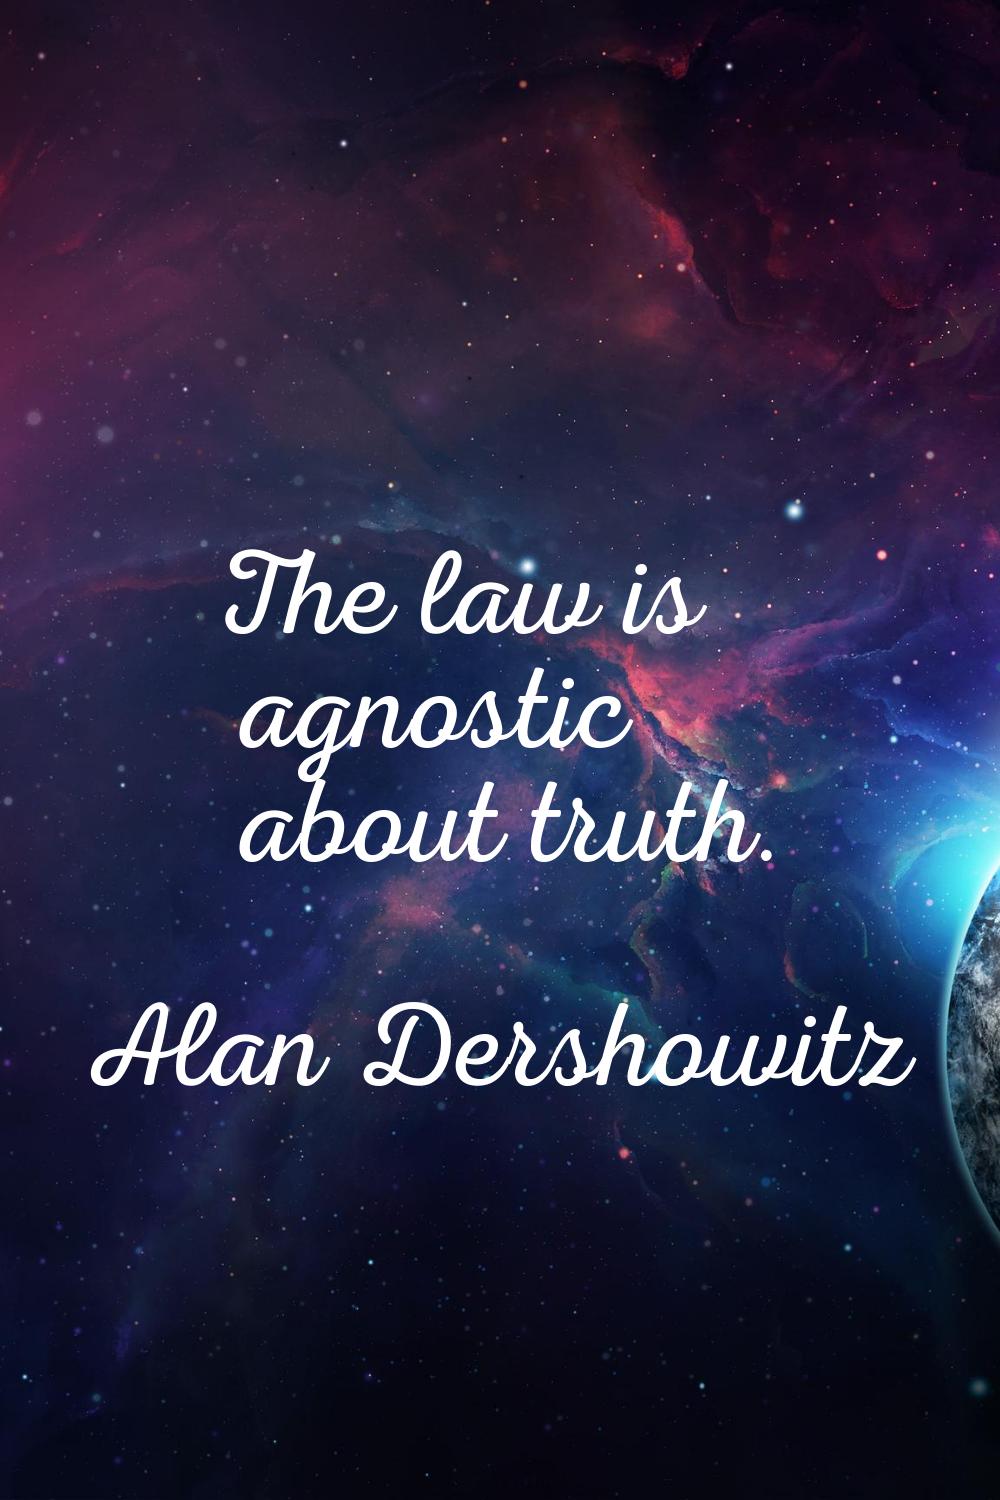 The law is agnostic about truth.